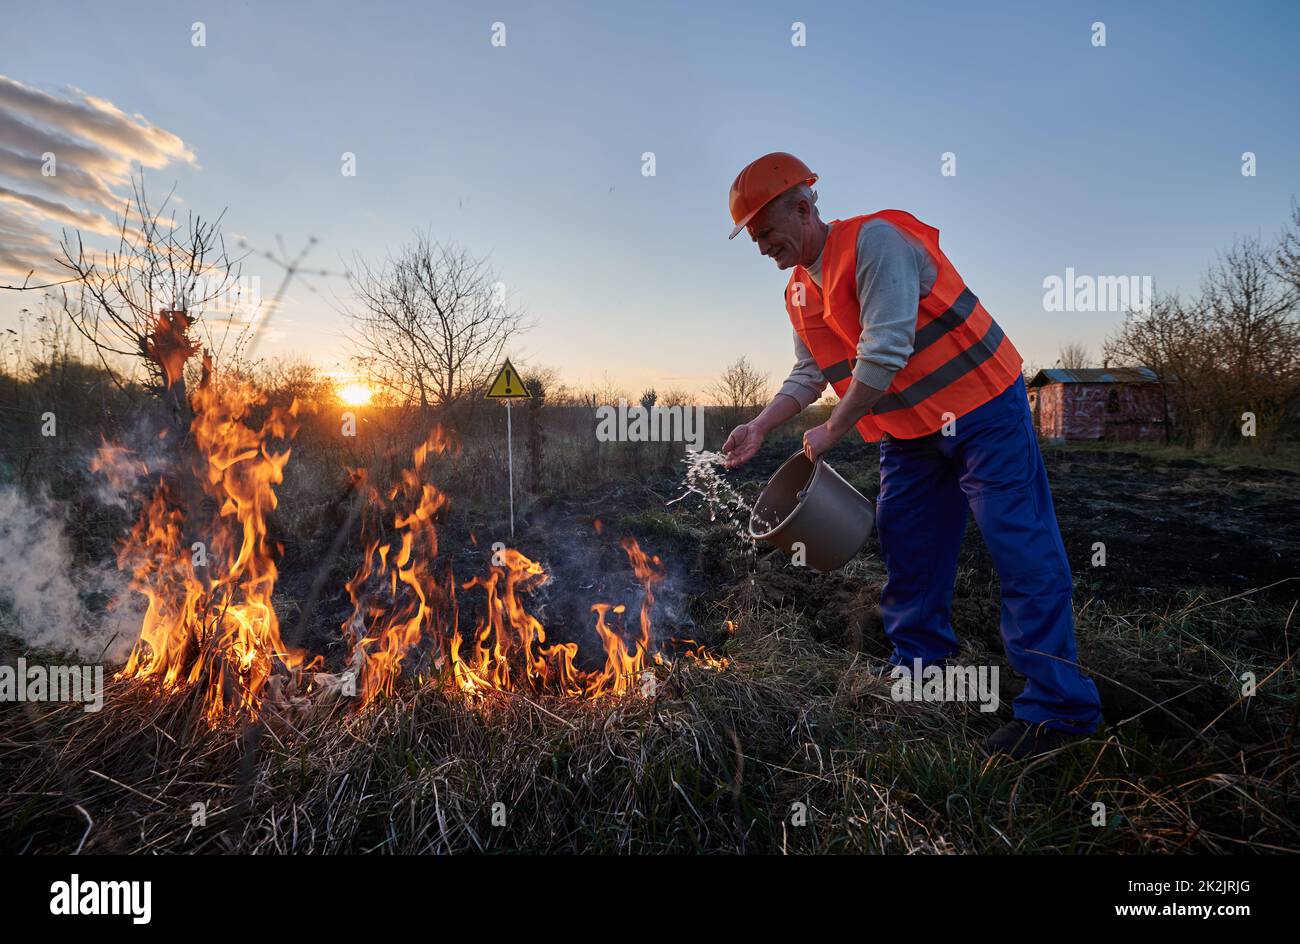 Fireman ecologist extinguishing fire in field with warning sign with exclamation mark end evening sky on background. Male environmentalist holding bucket and pouring water on burning dry grass. Stock Photo